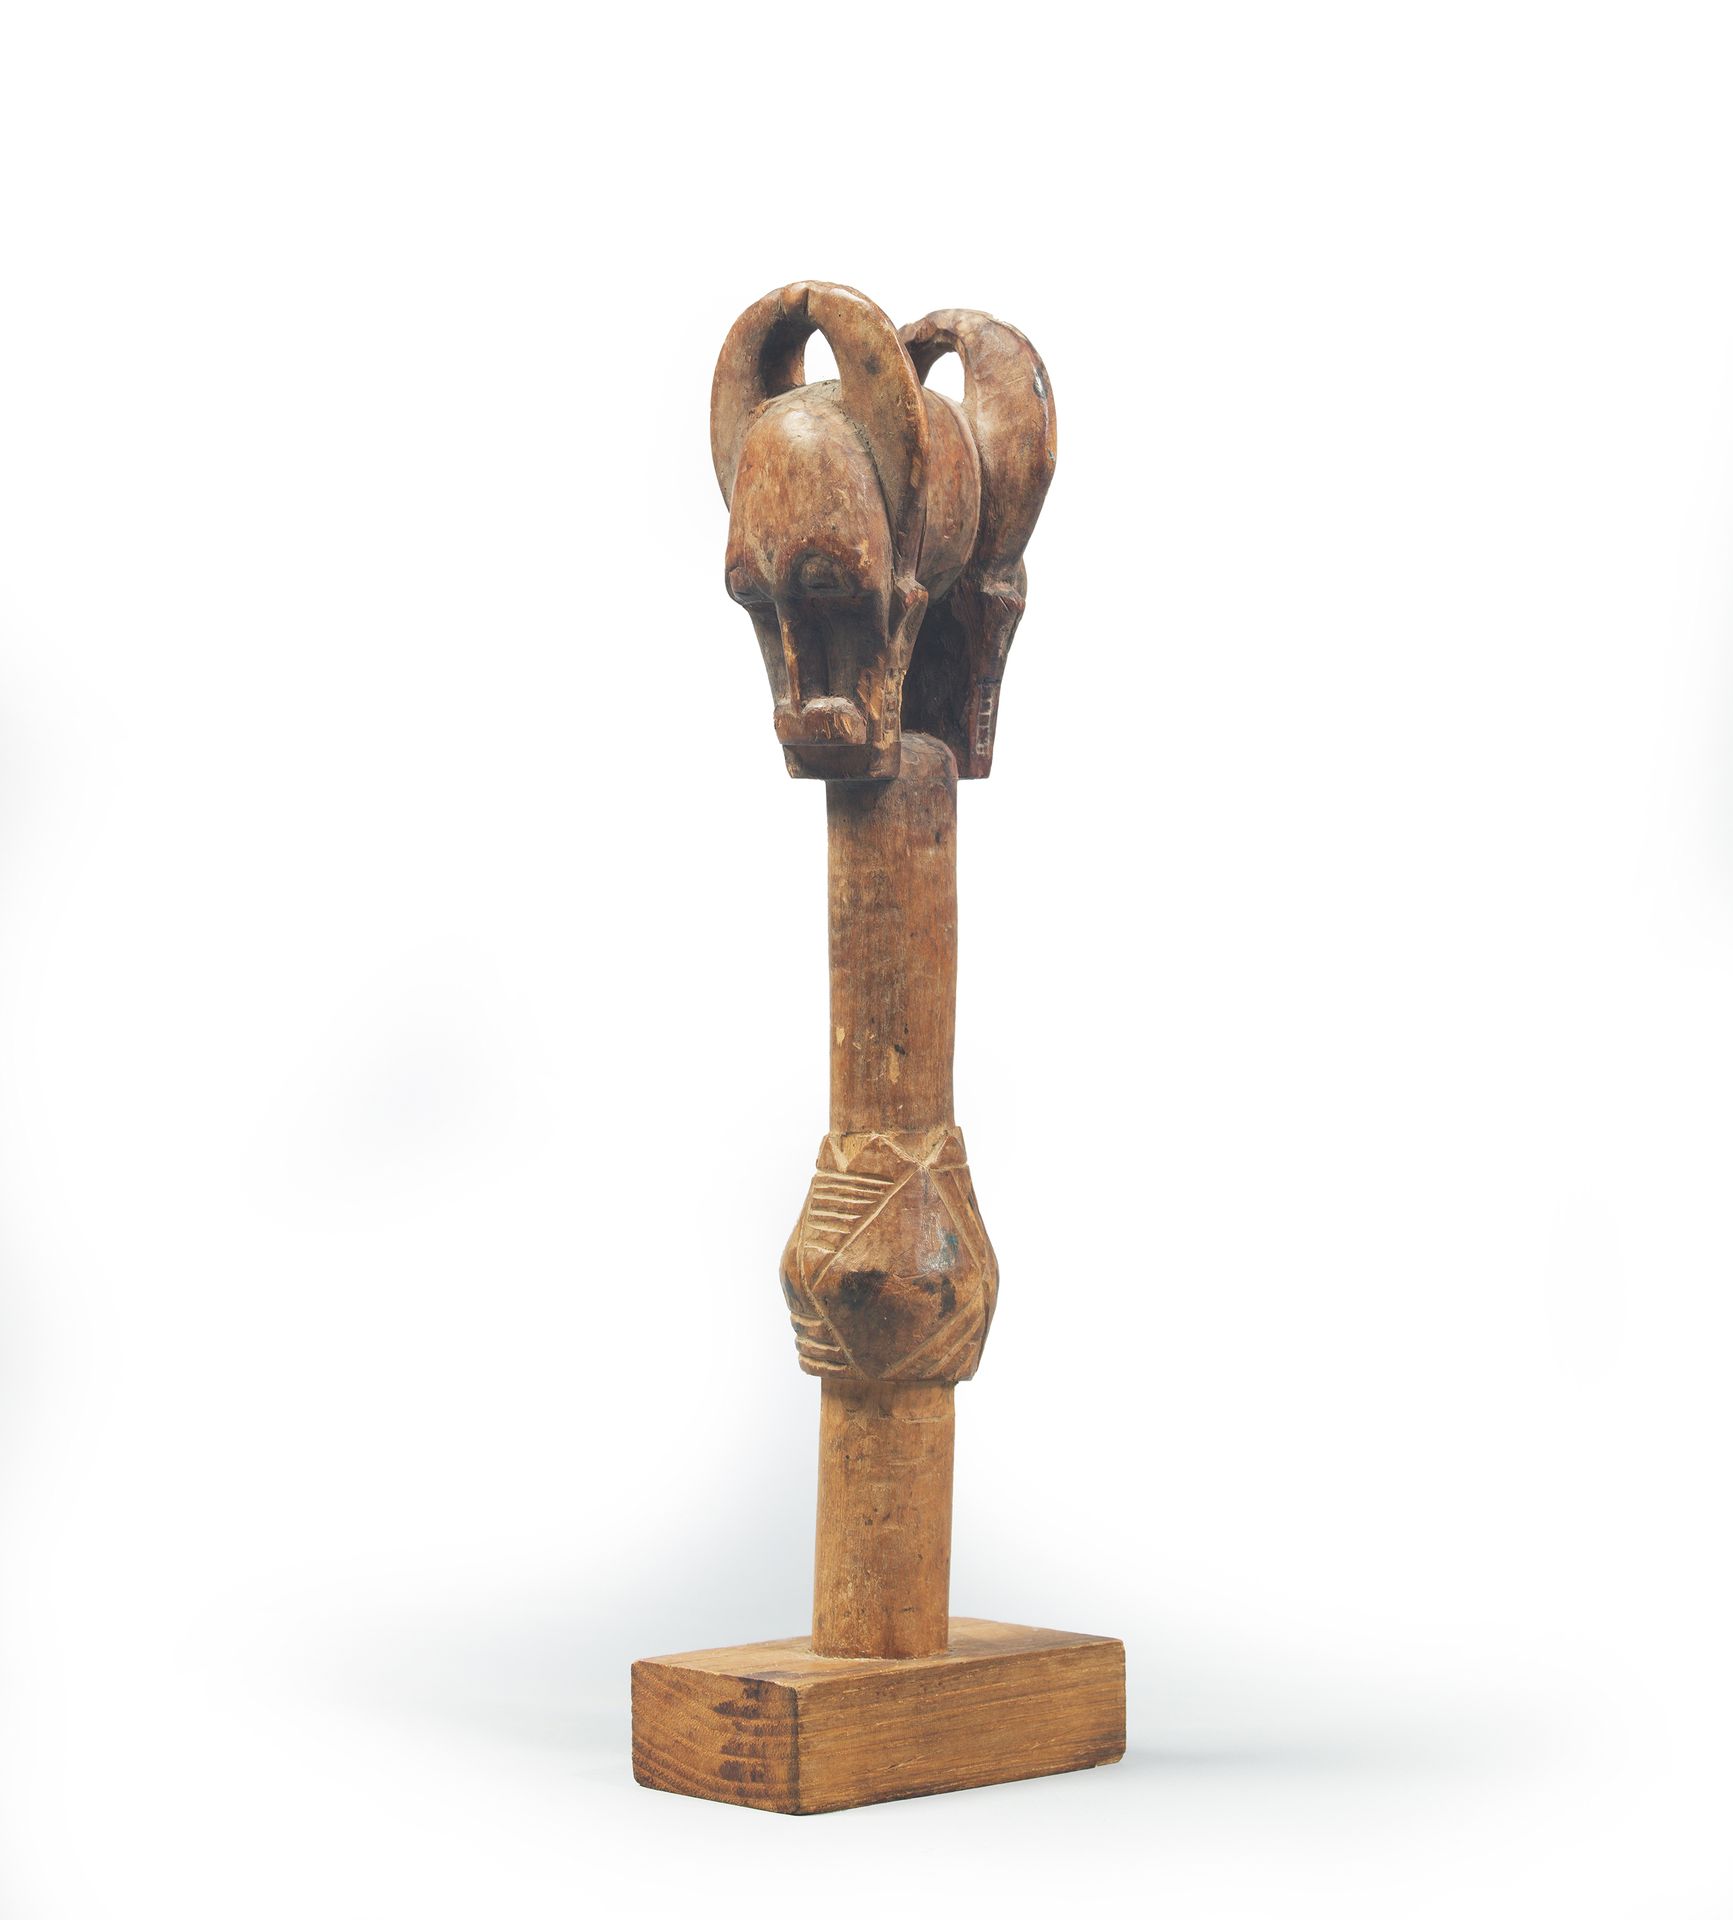 Null CANE TOP

Baule, Ivory Coast 20th century

Wood with patina

21 x 5 cm